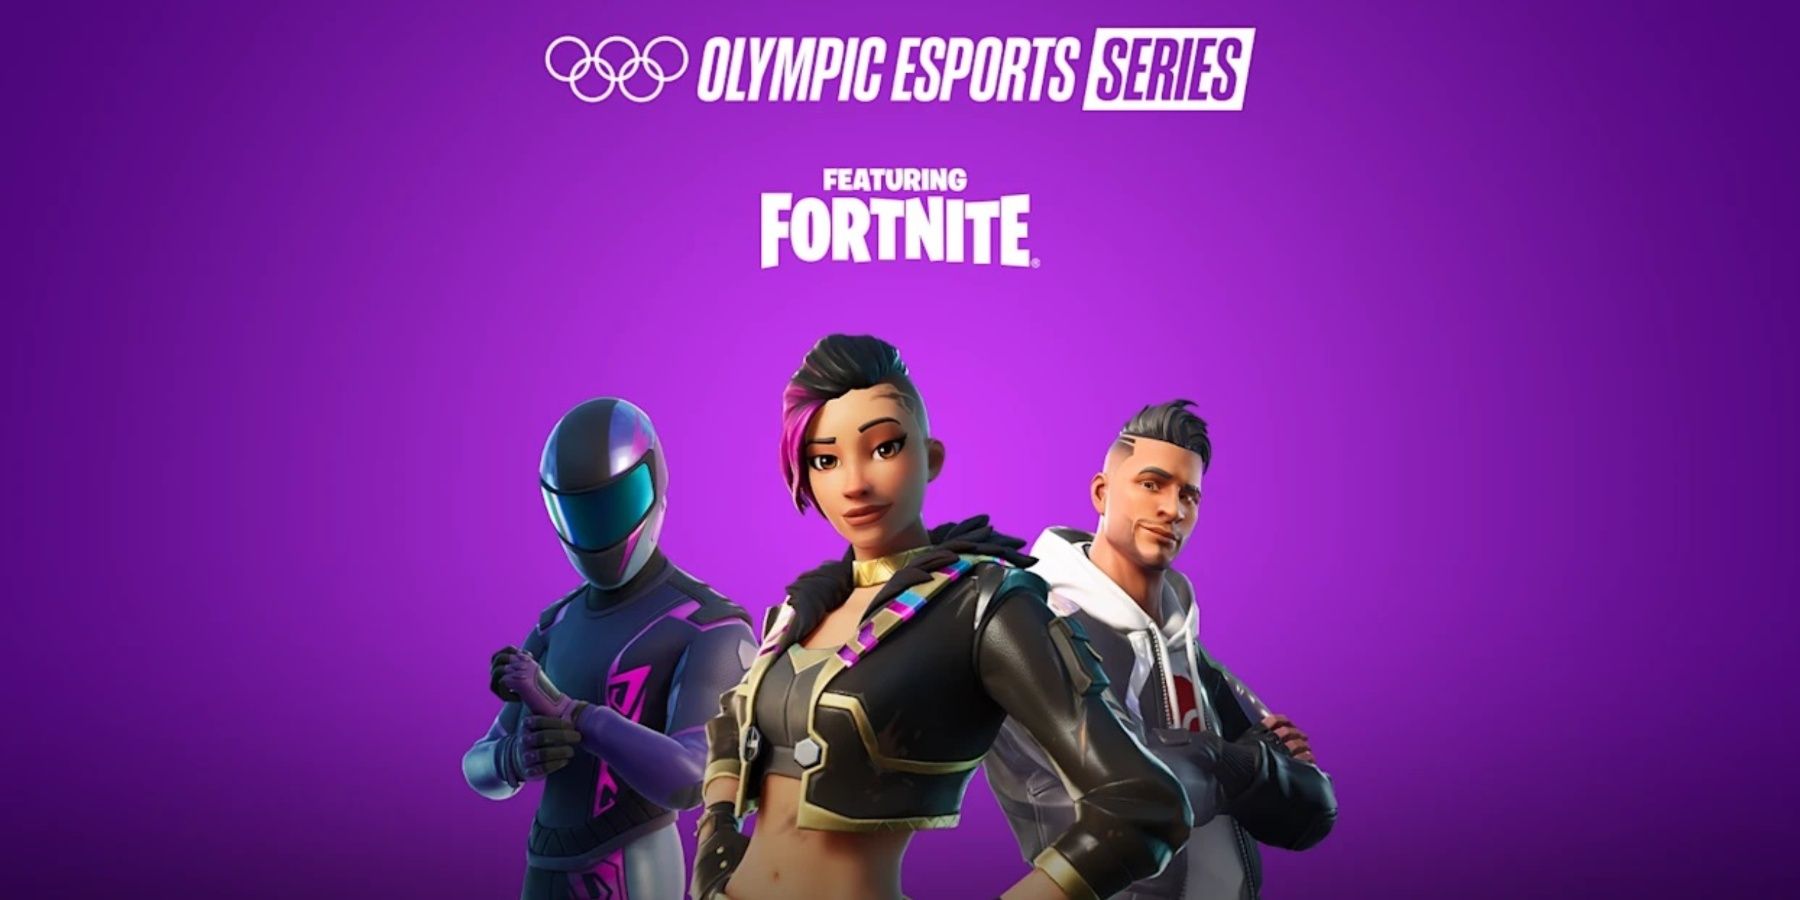 fortnite as sport shooting competition in the olympics